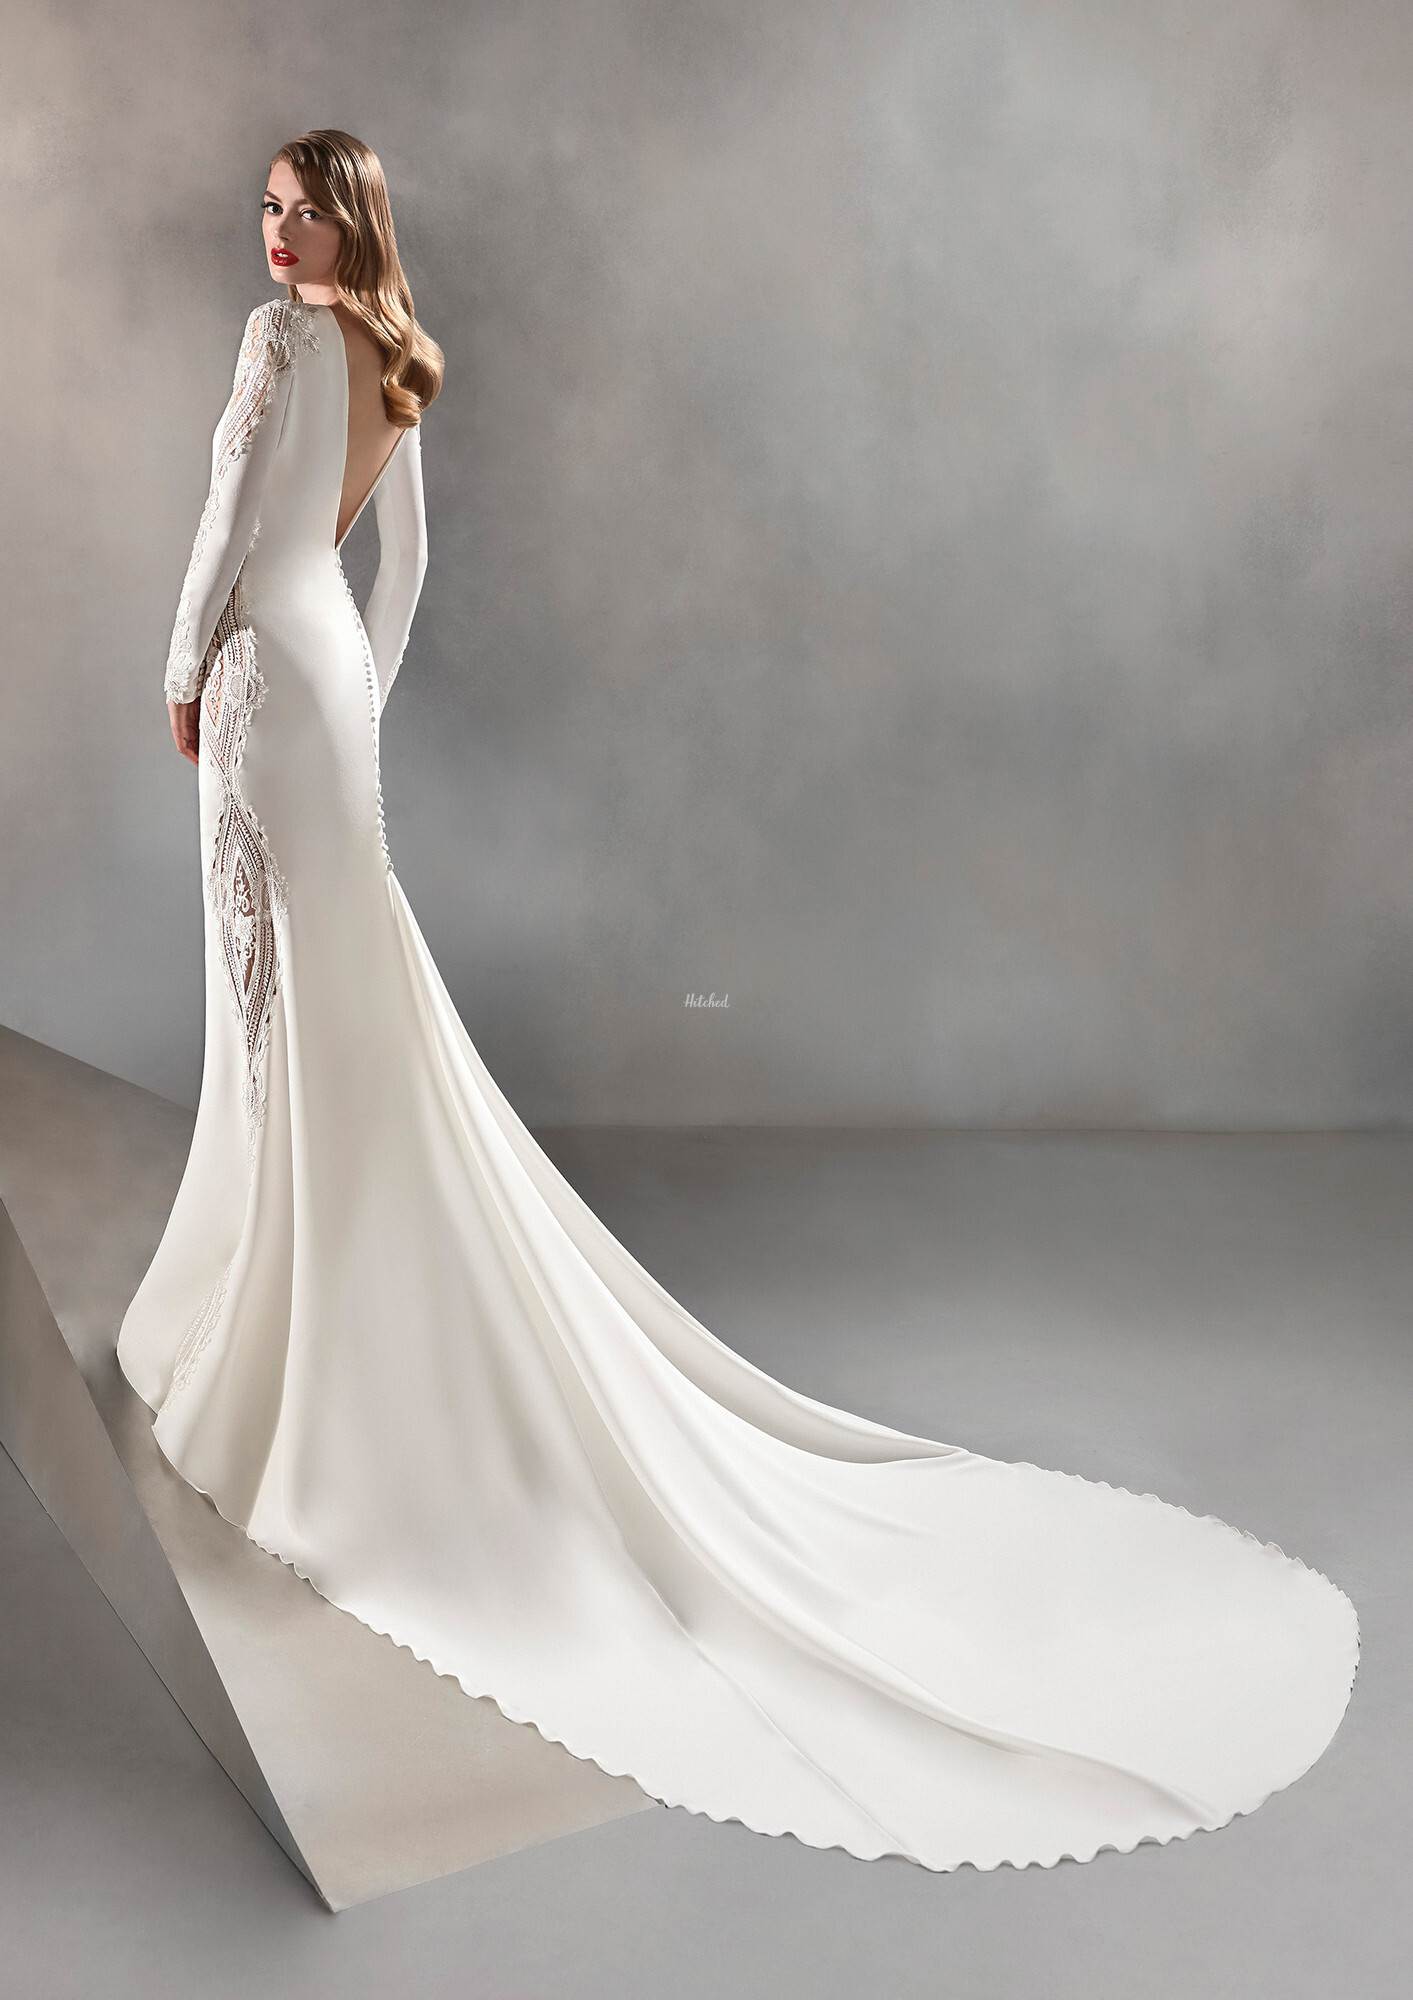 CONDESA Wedding Dress from Atelier Pronovias - hitched.co.uk